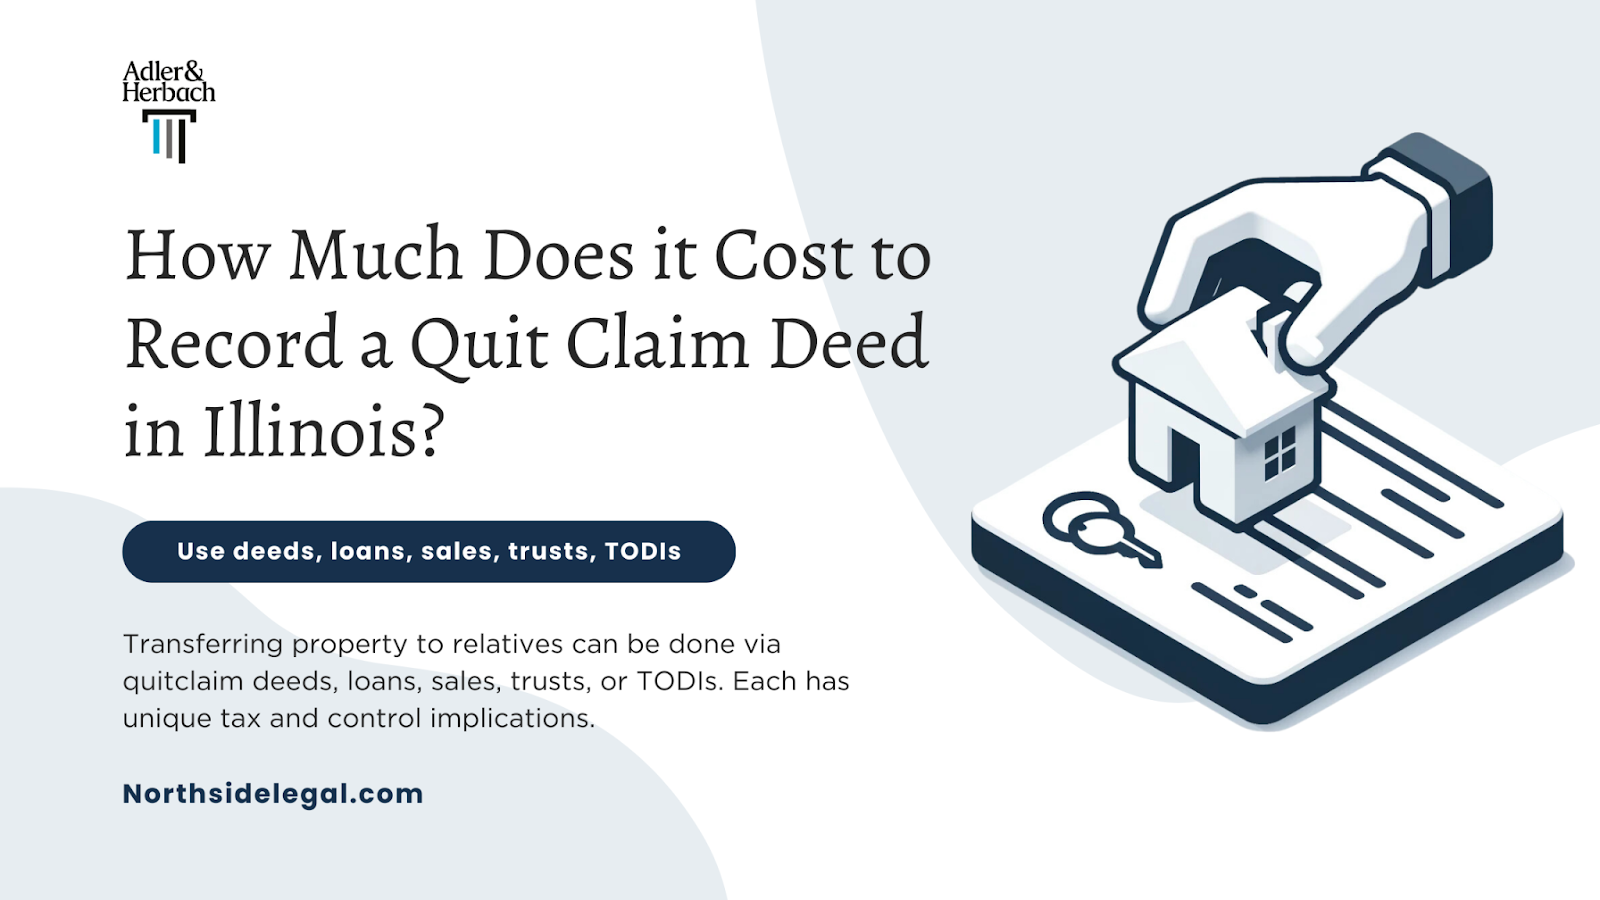 Transferring property to relatives can be done via quitclaim deeds, loans, sales, trusts, or TODIs. Each has unique tax implications.